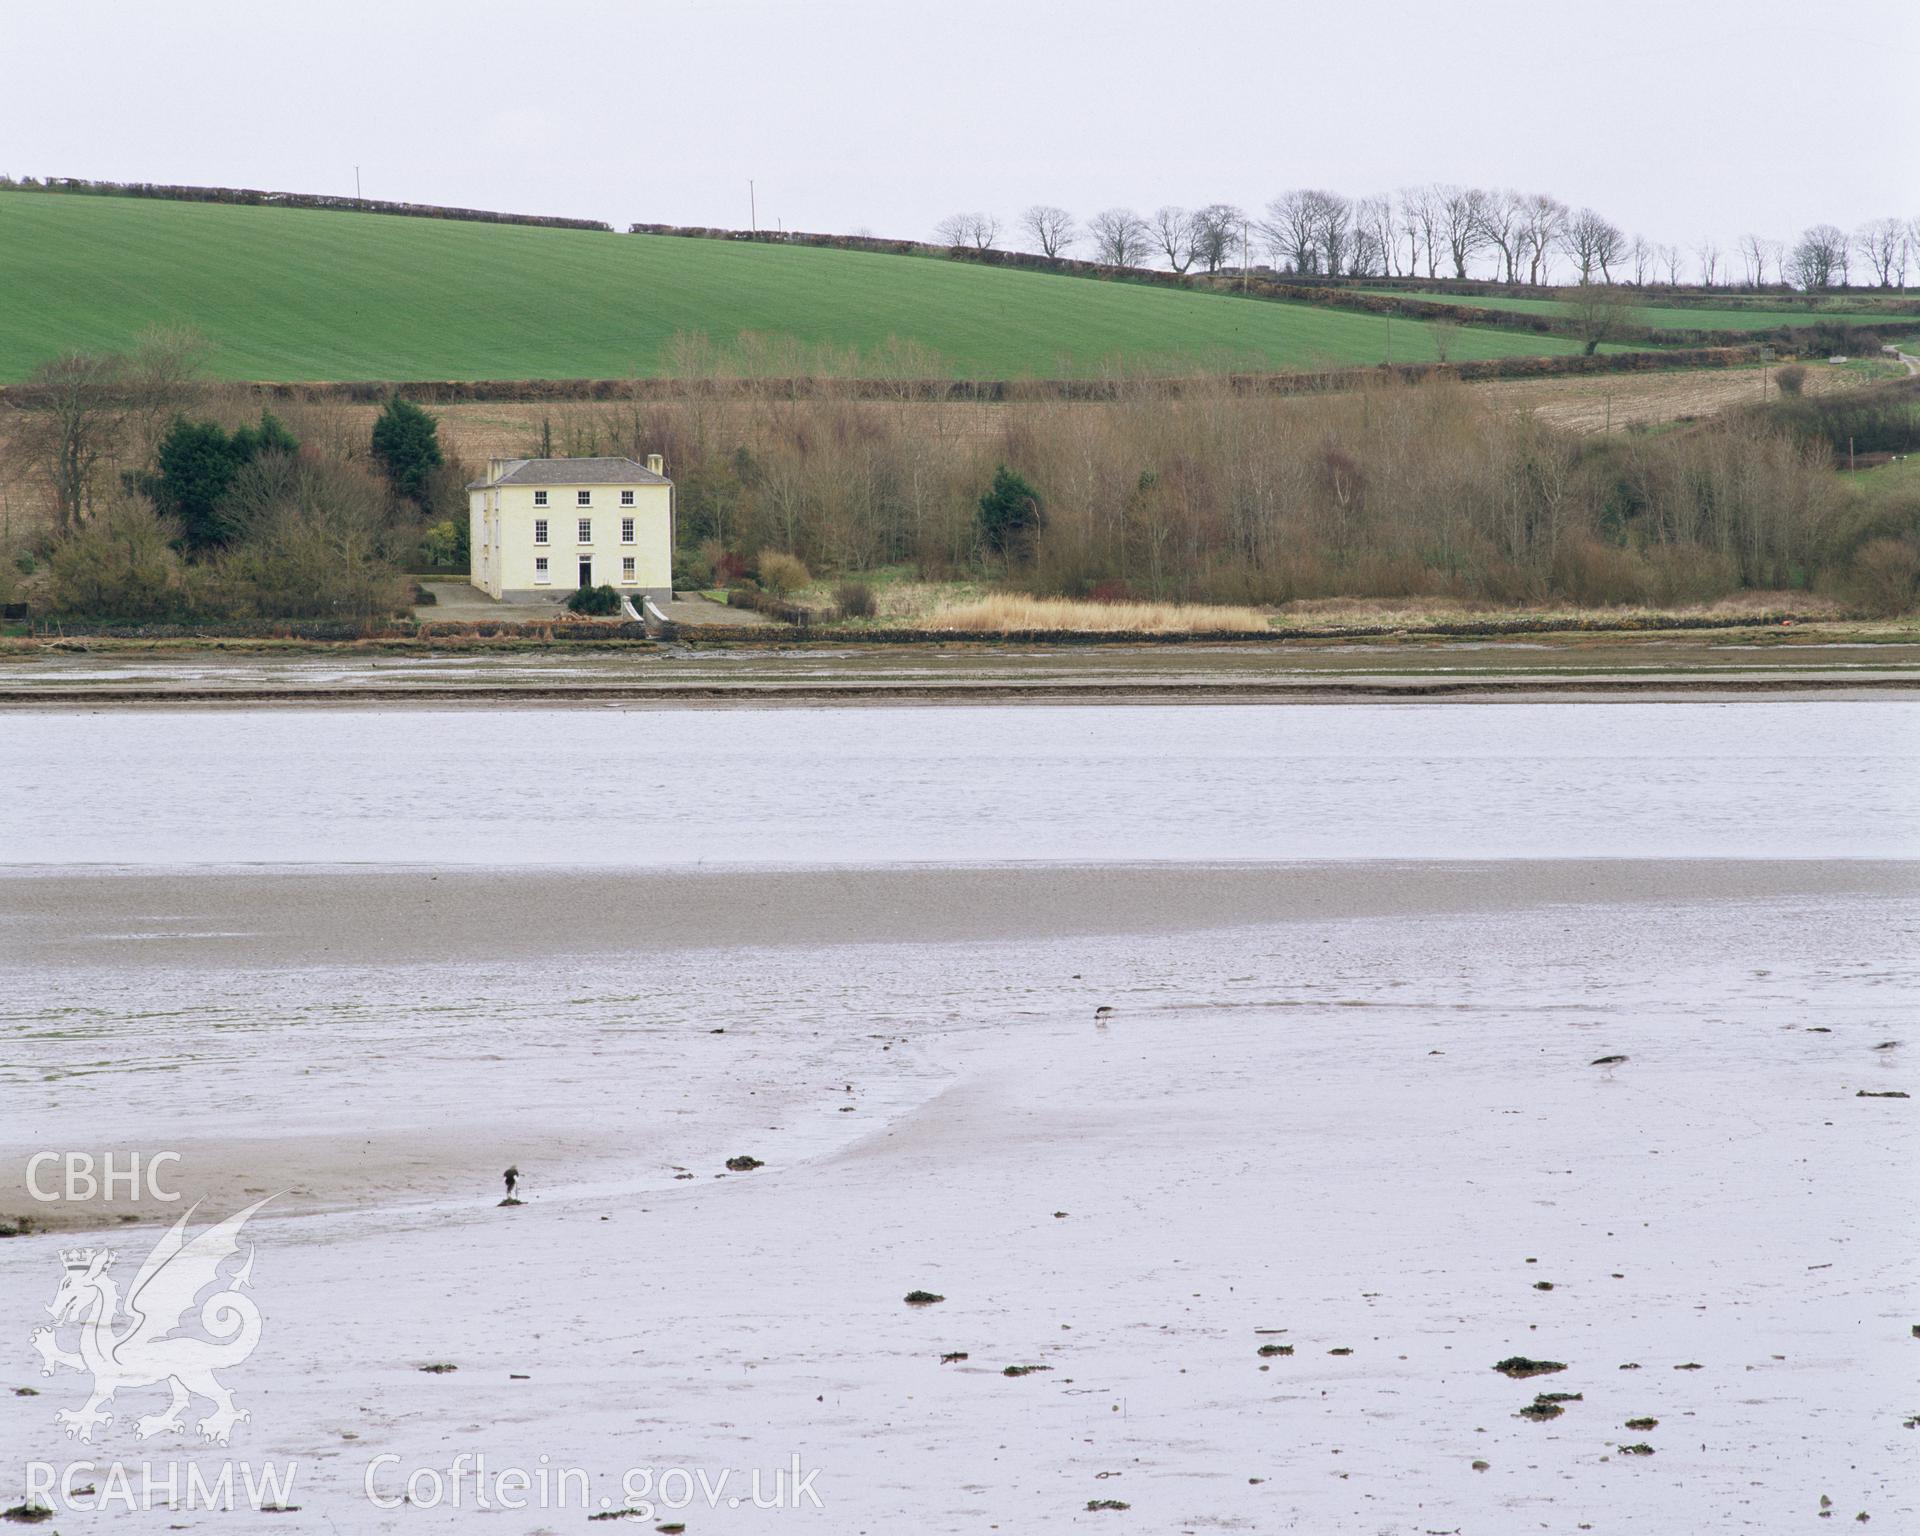 Colour transparency showing an exterior view of Brynymor, Cardigan from across the estuary, produced by Iain Wright, June 2004